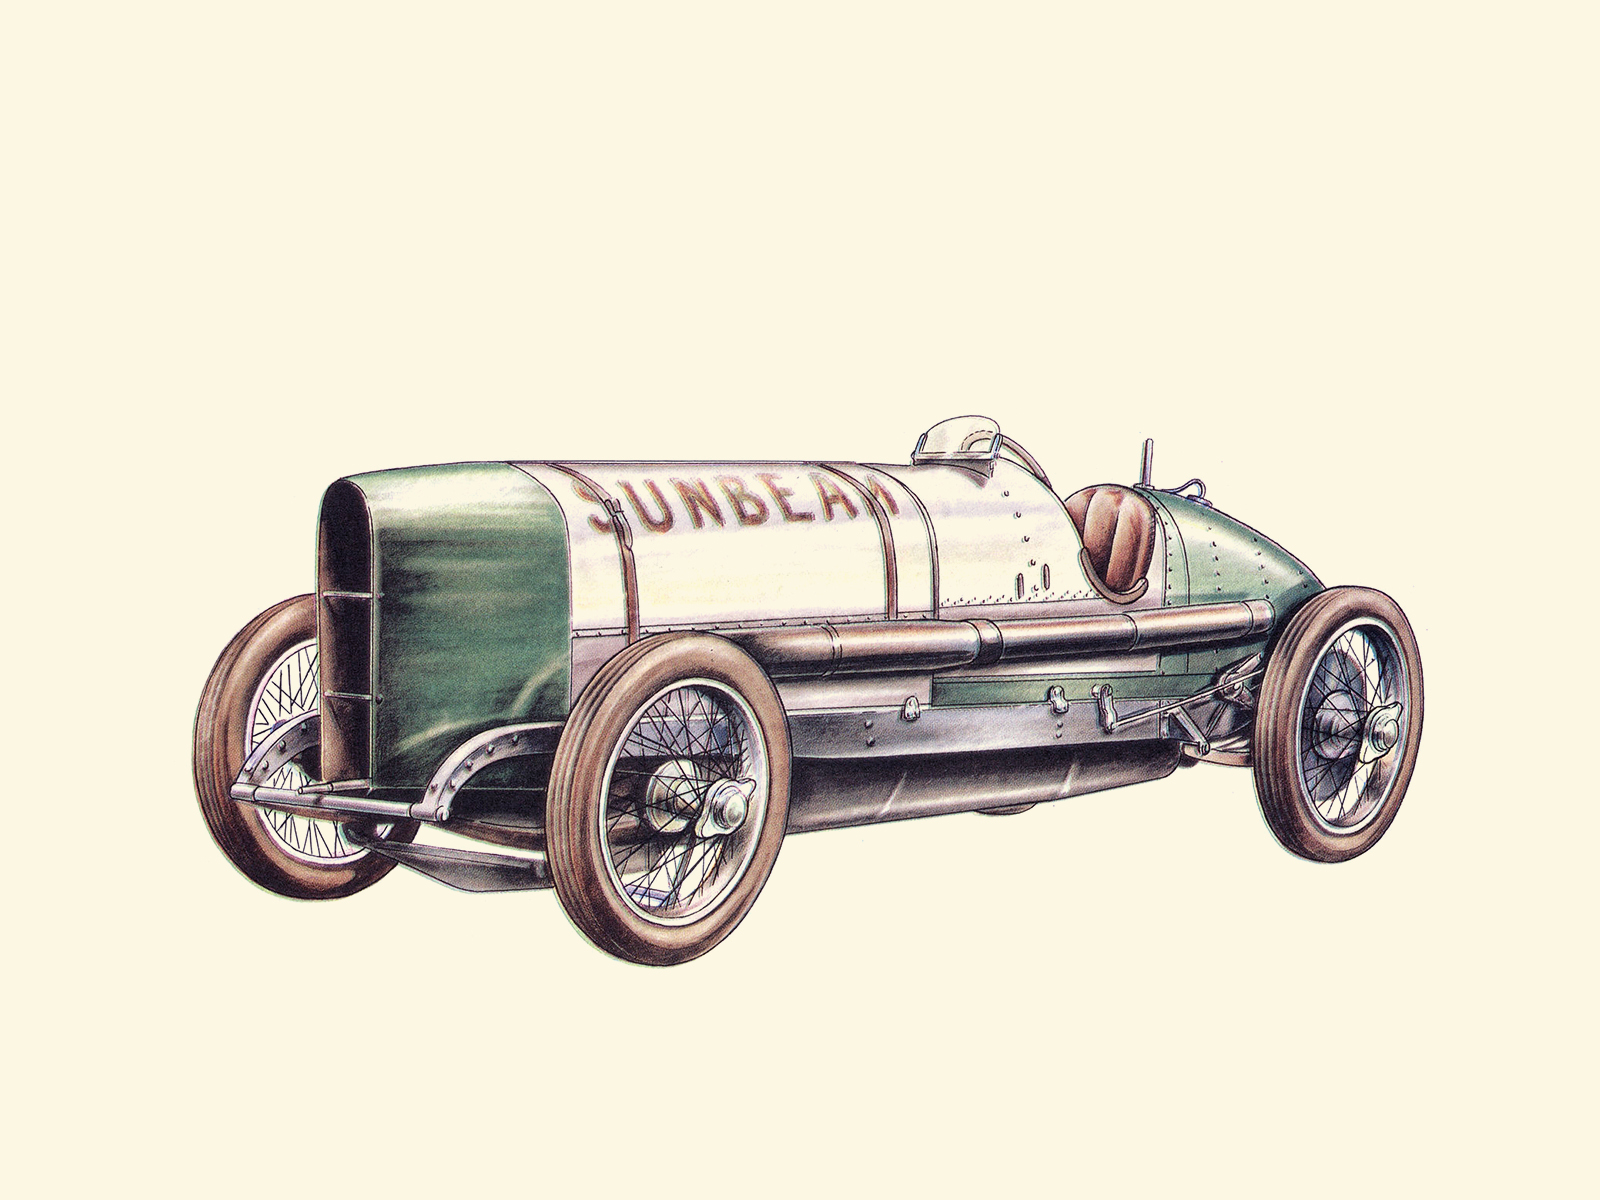 1922 Sunbeam (K.L. Guinness 133.75 mph): Illustrated by Piet Olyslager